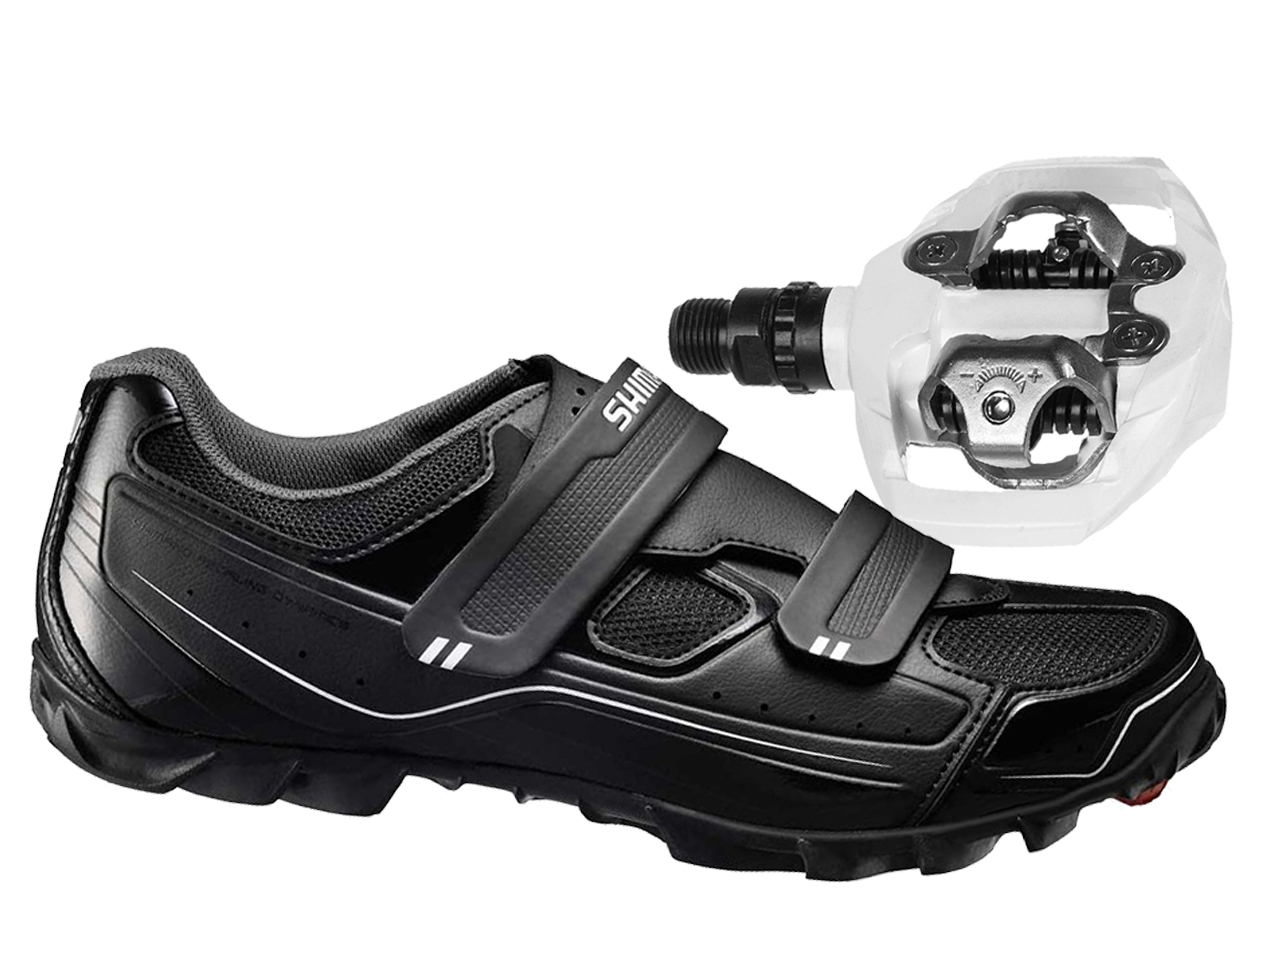 Details about   Shimano SH-M065L SPD Mountain Cycling Shoes 38 EU 5.2 US New in Box 